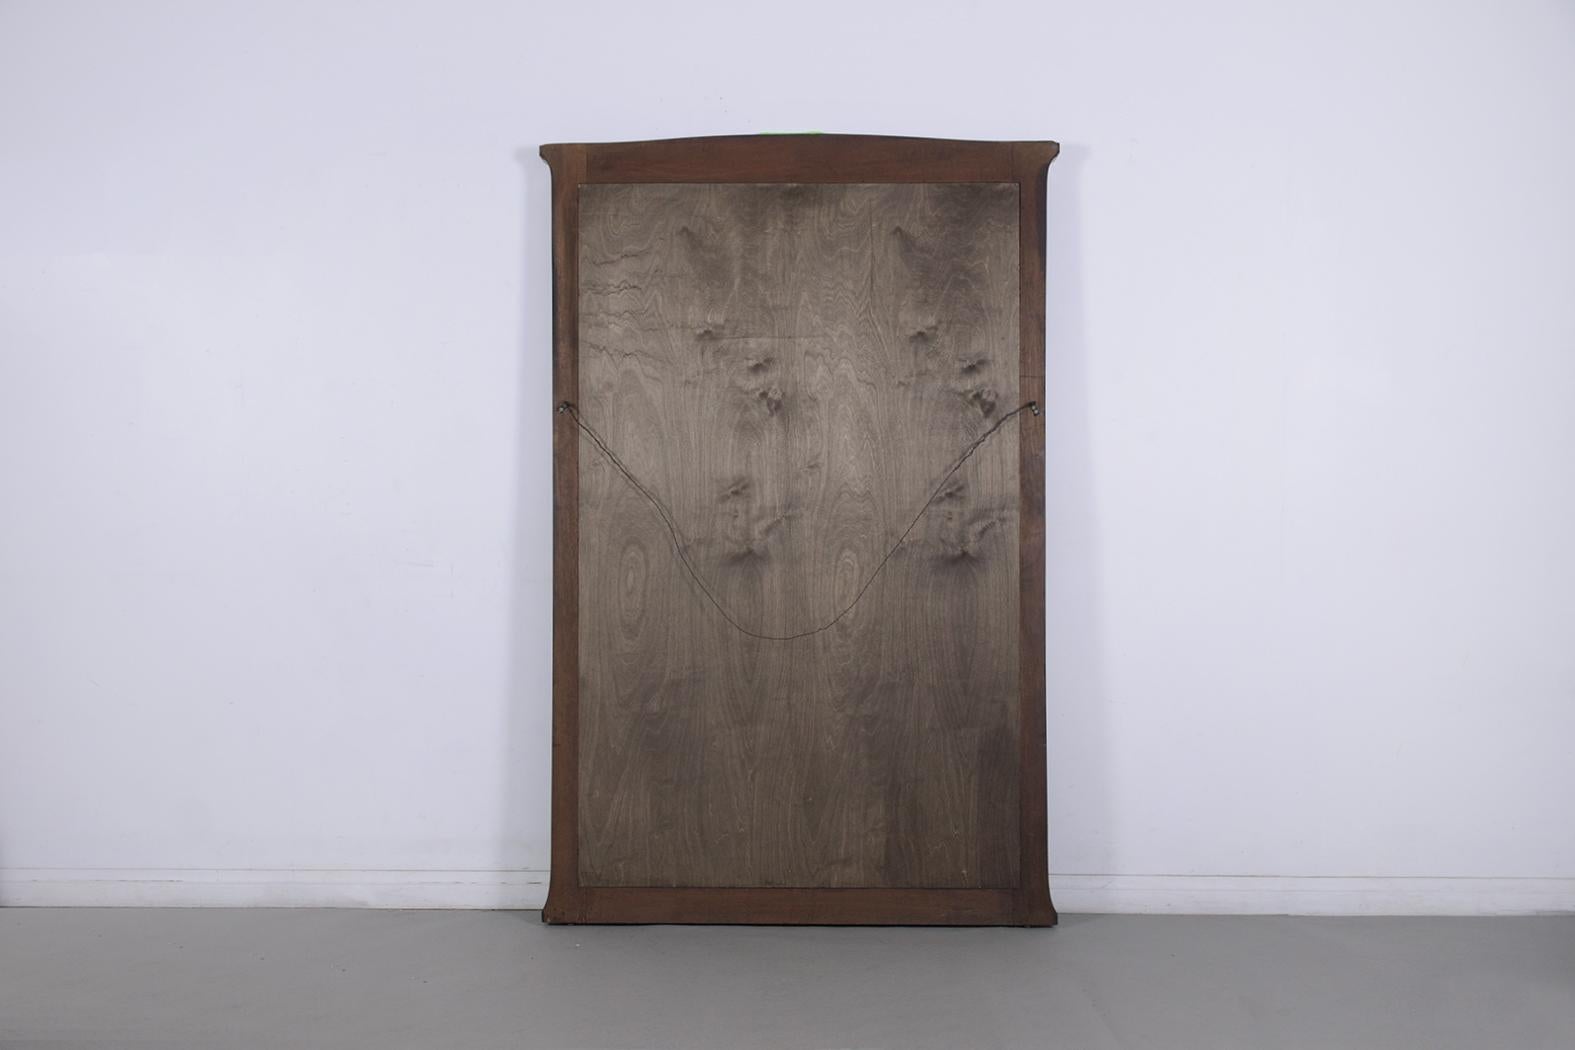 19th-Century Art Nouveau Mantel Mirror: Hand-Carved Mahogany with Ebonized Stain 3